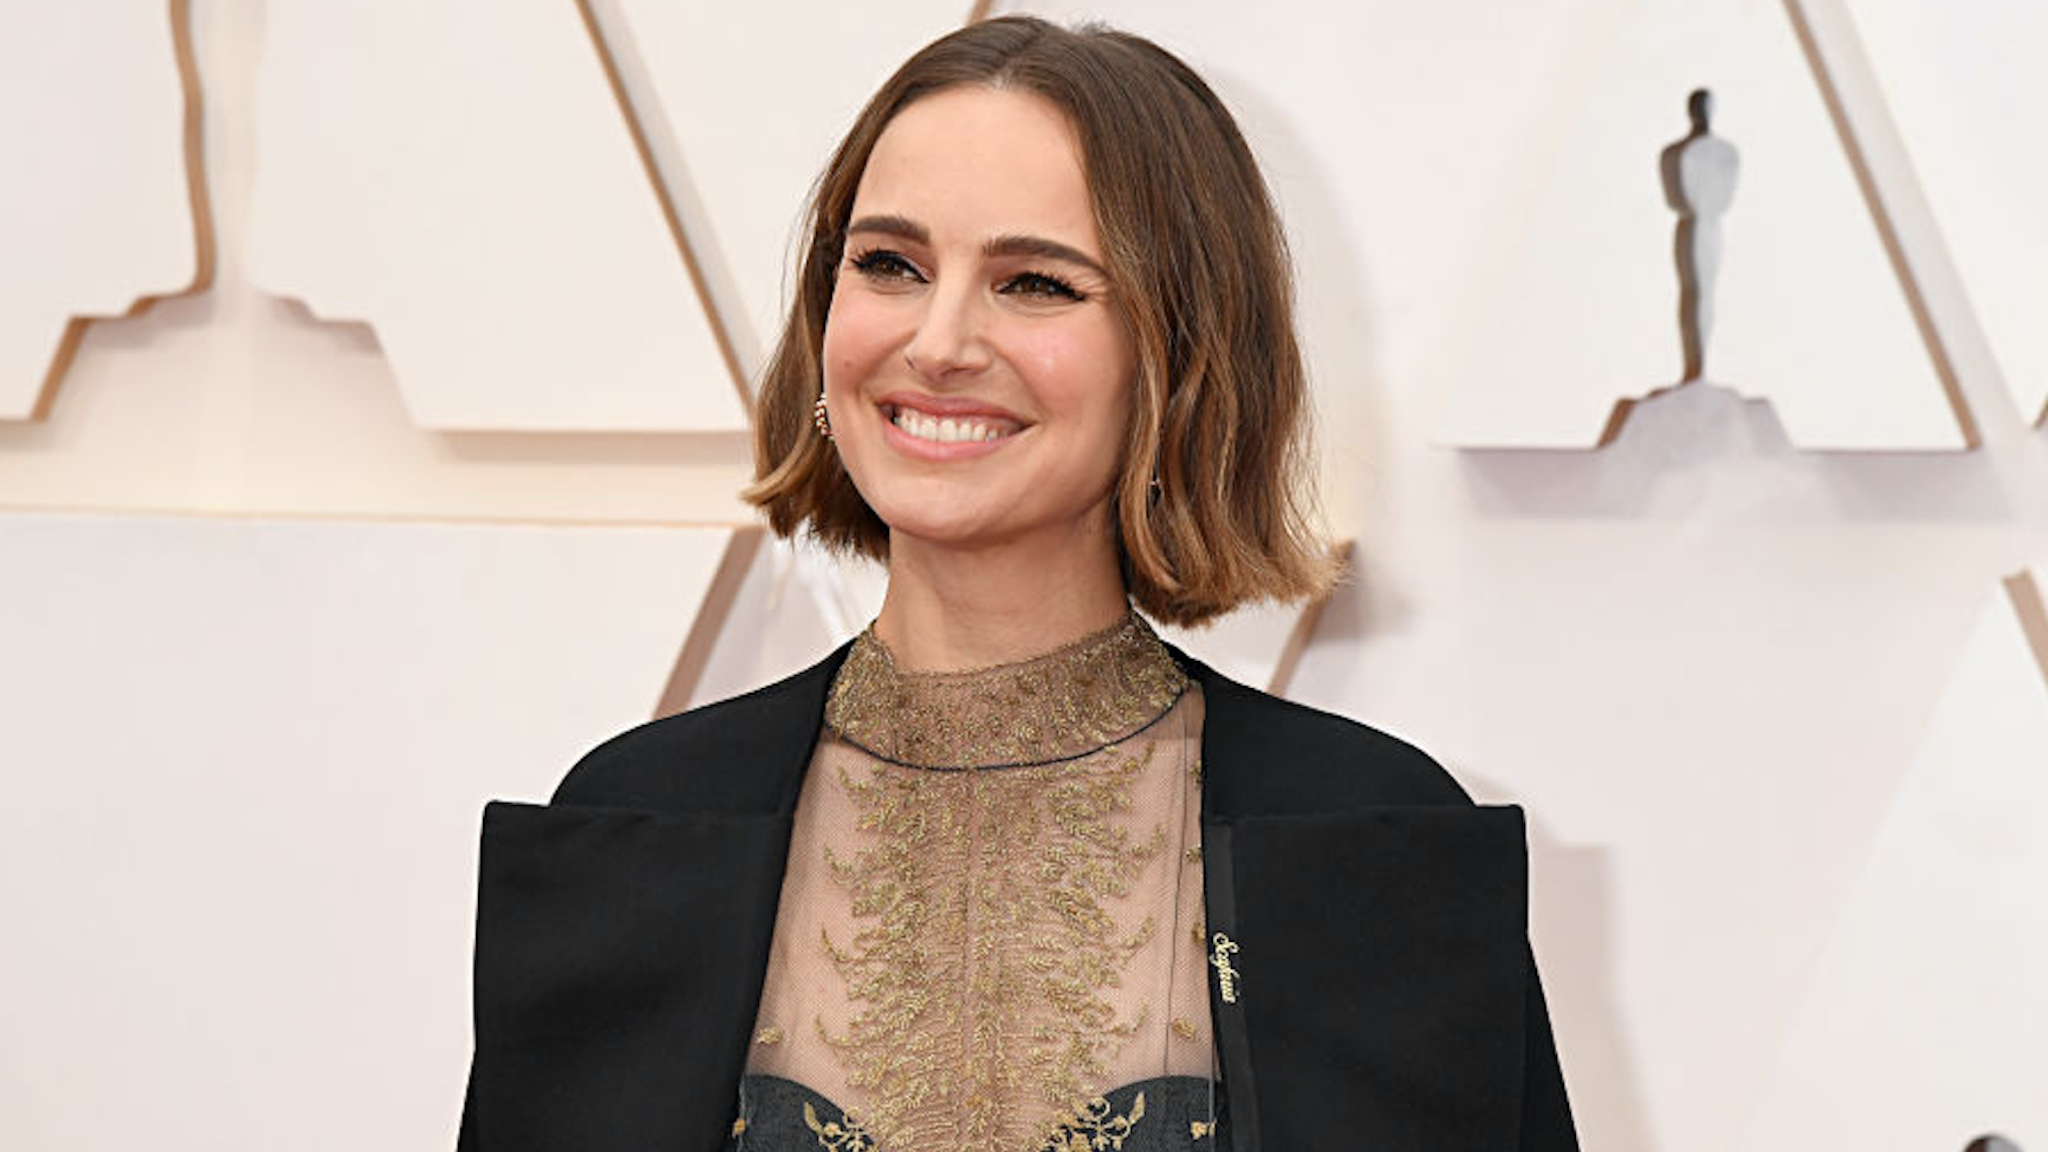 Natalie Portman attends the 92nd Annual Academy Awards at Hollywood and Highland on February 09, 2020 in Hollywood, California.